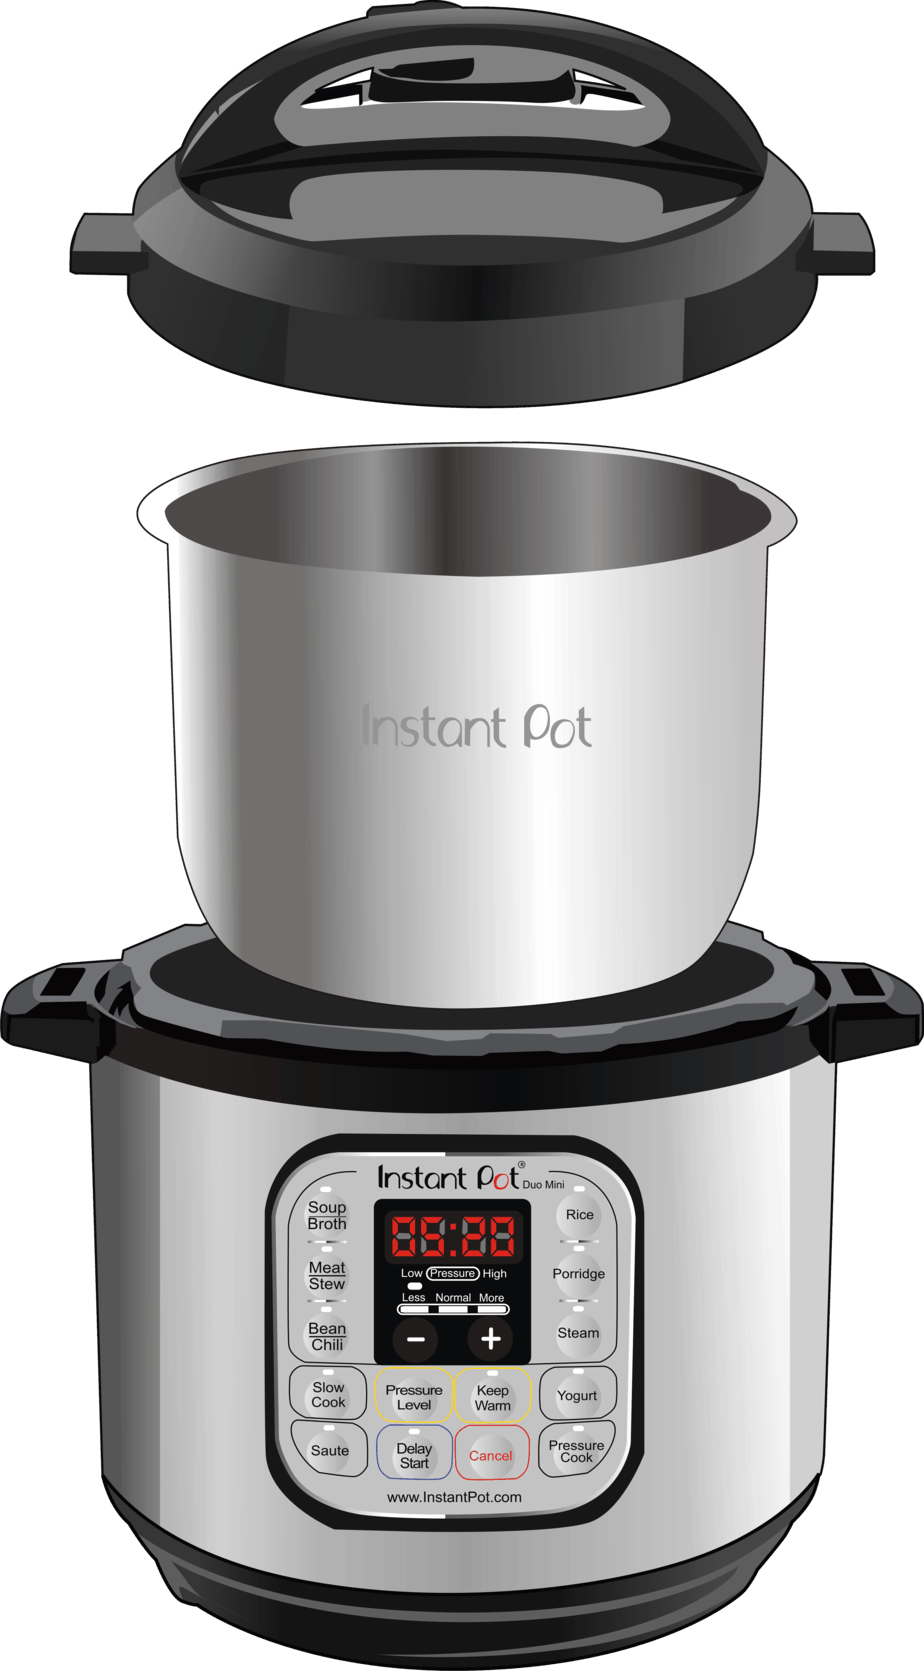 Instant Pot Stainless Steel Inner Cooking Pot with Handles, 8-Qt, Polished  Surface, Rice Cooker, Stainless Steel Cooking Pot, Use with 8-Qt Duo Evo